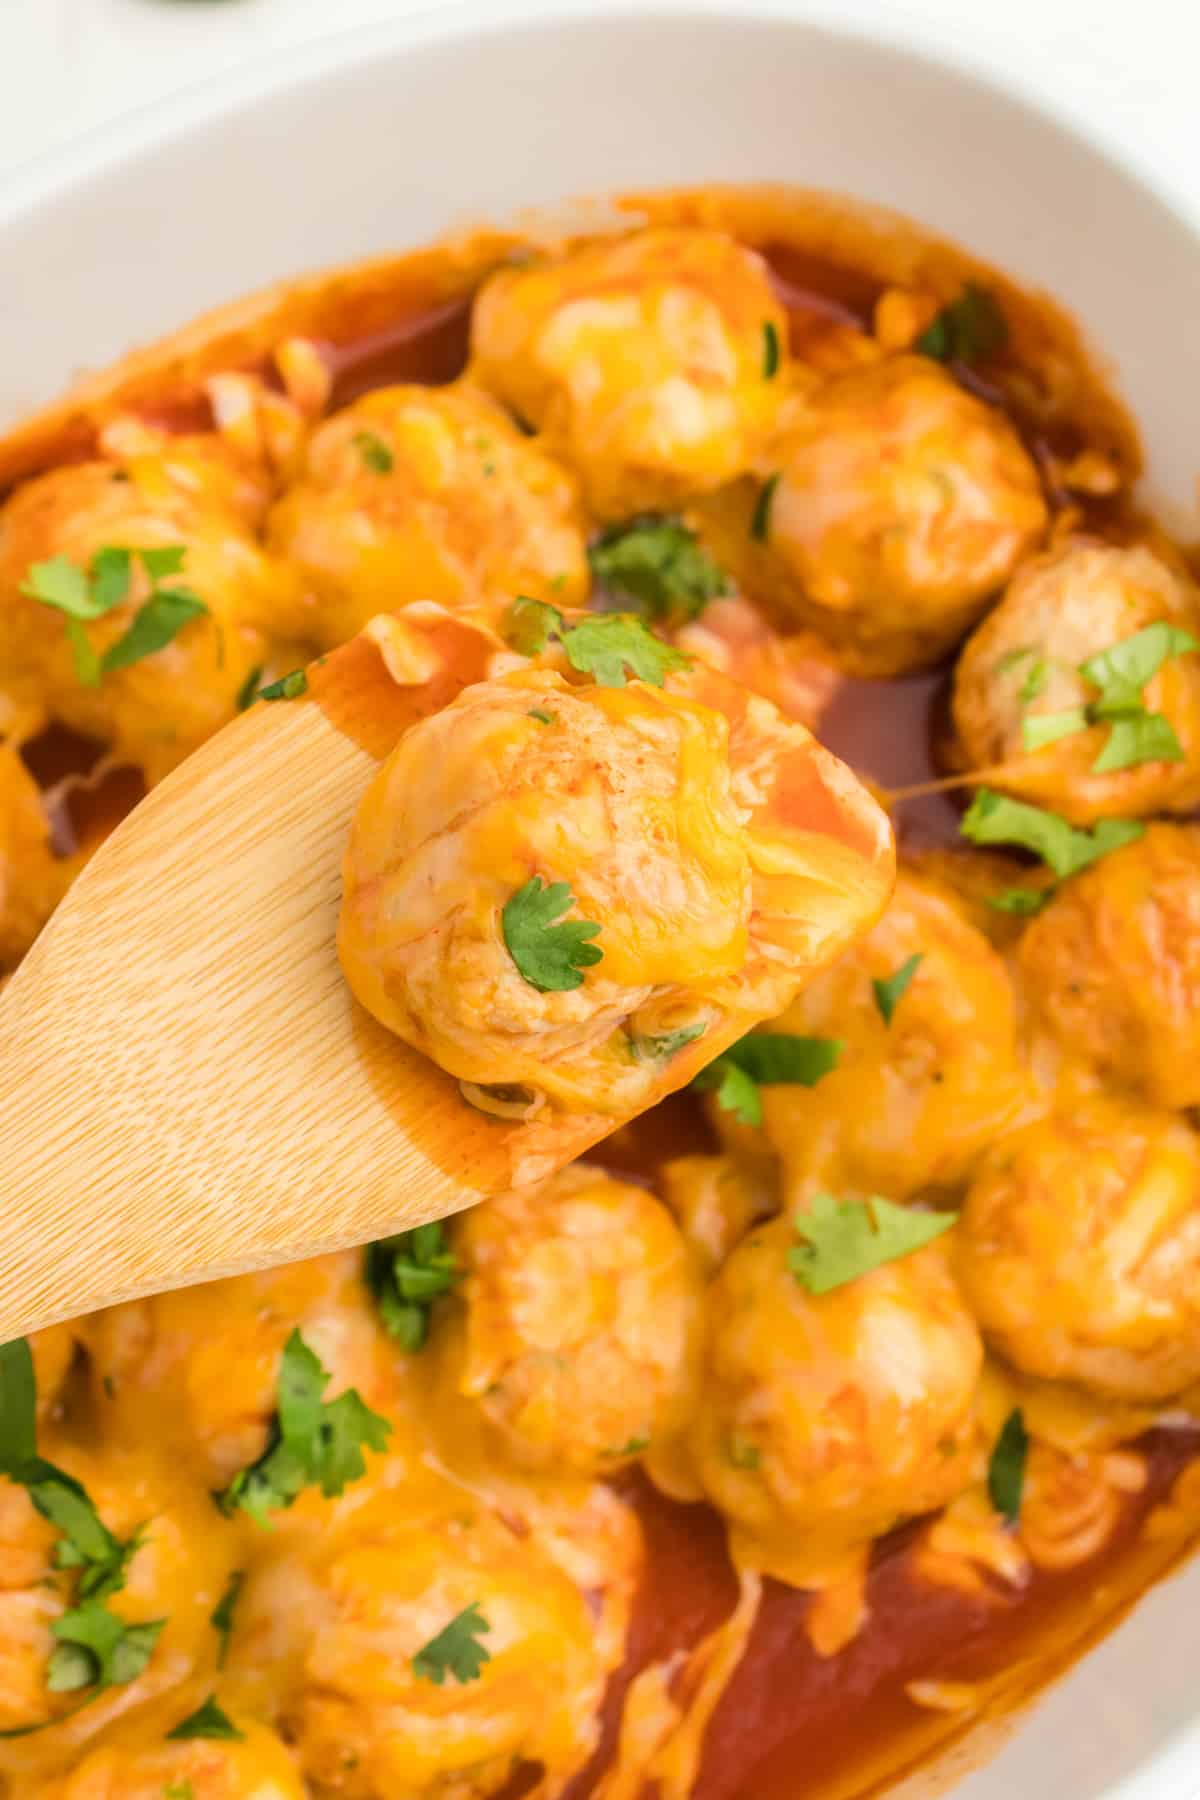 close up of a wooden spoon lifting a chicken enchilada meatball from a white oval baking dish.